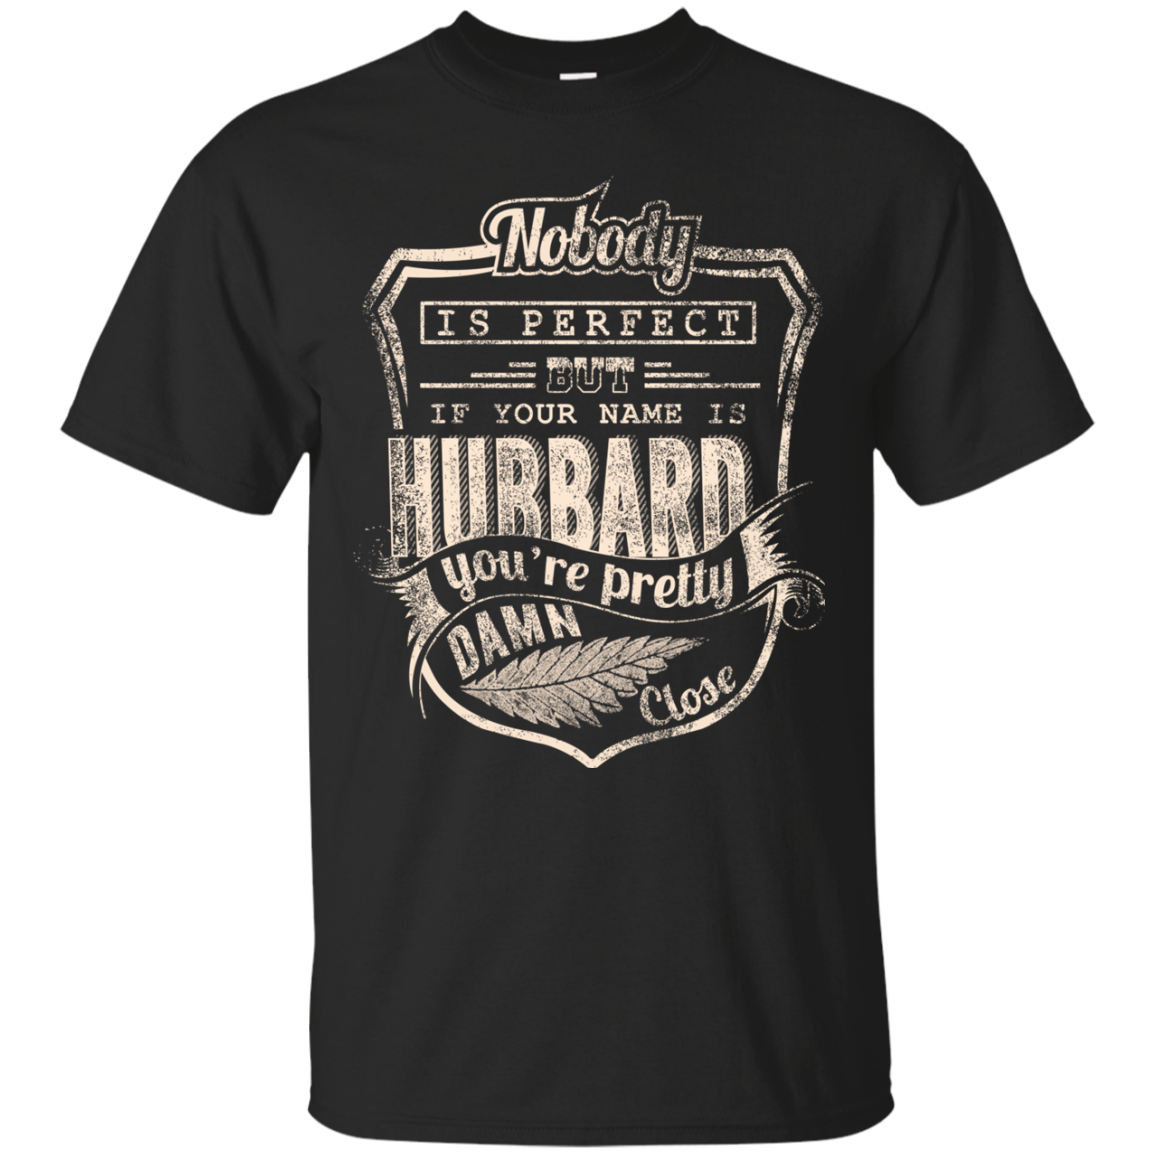 Hubbard Shirts If Your Name Is Hubbard You're Pretty Close - Teesmiley